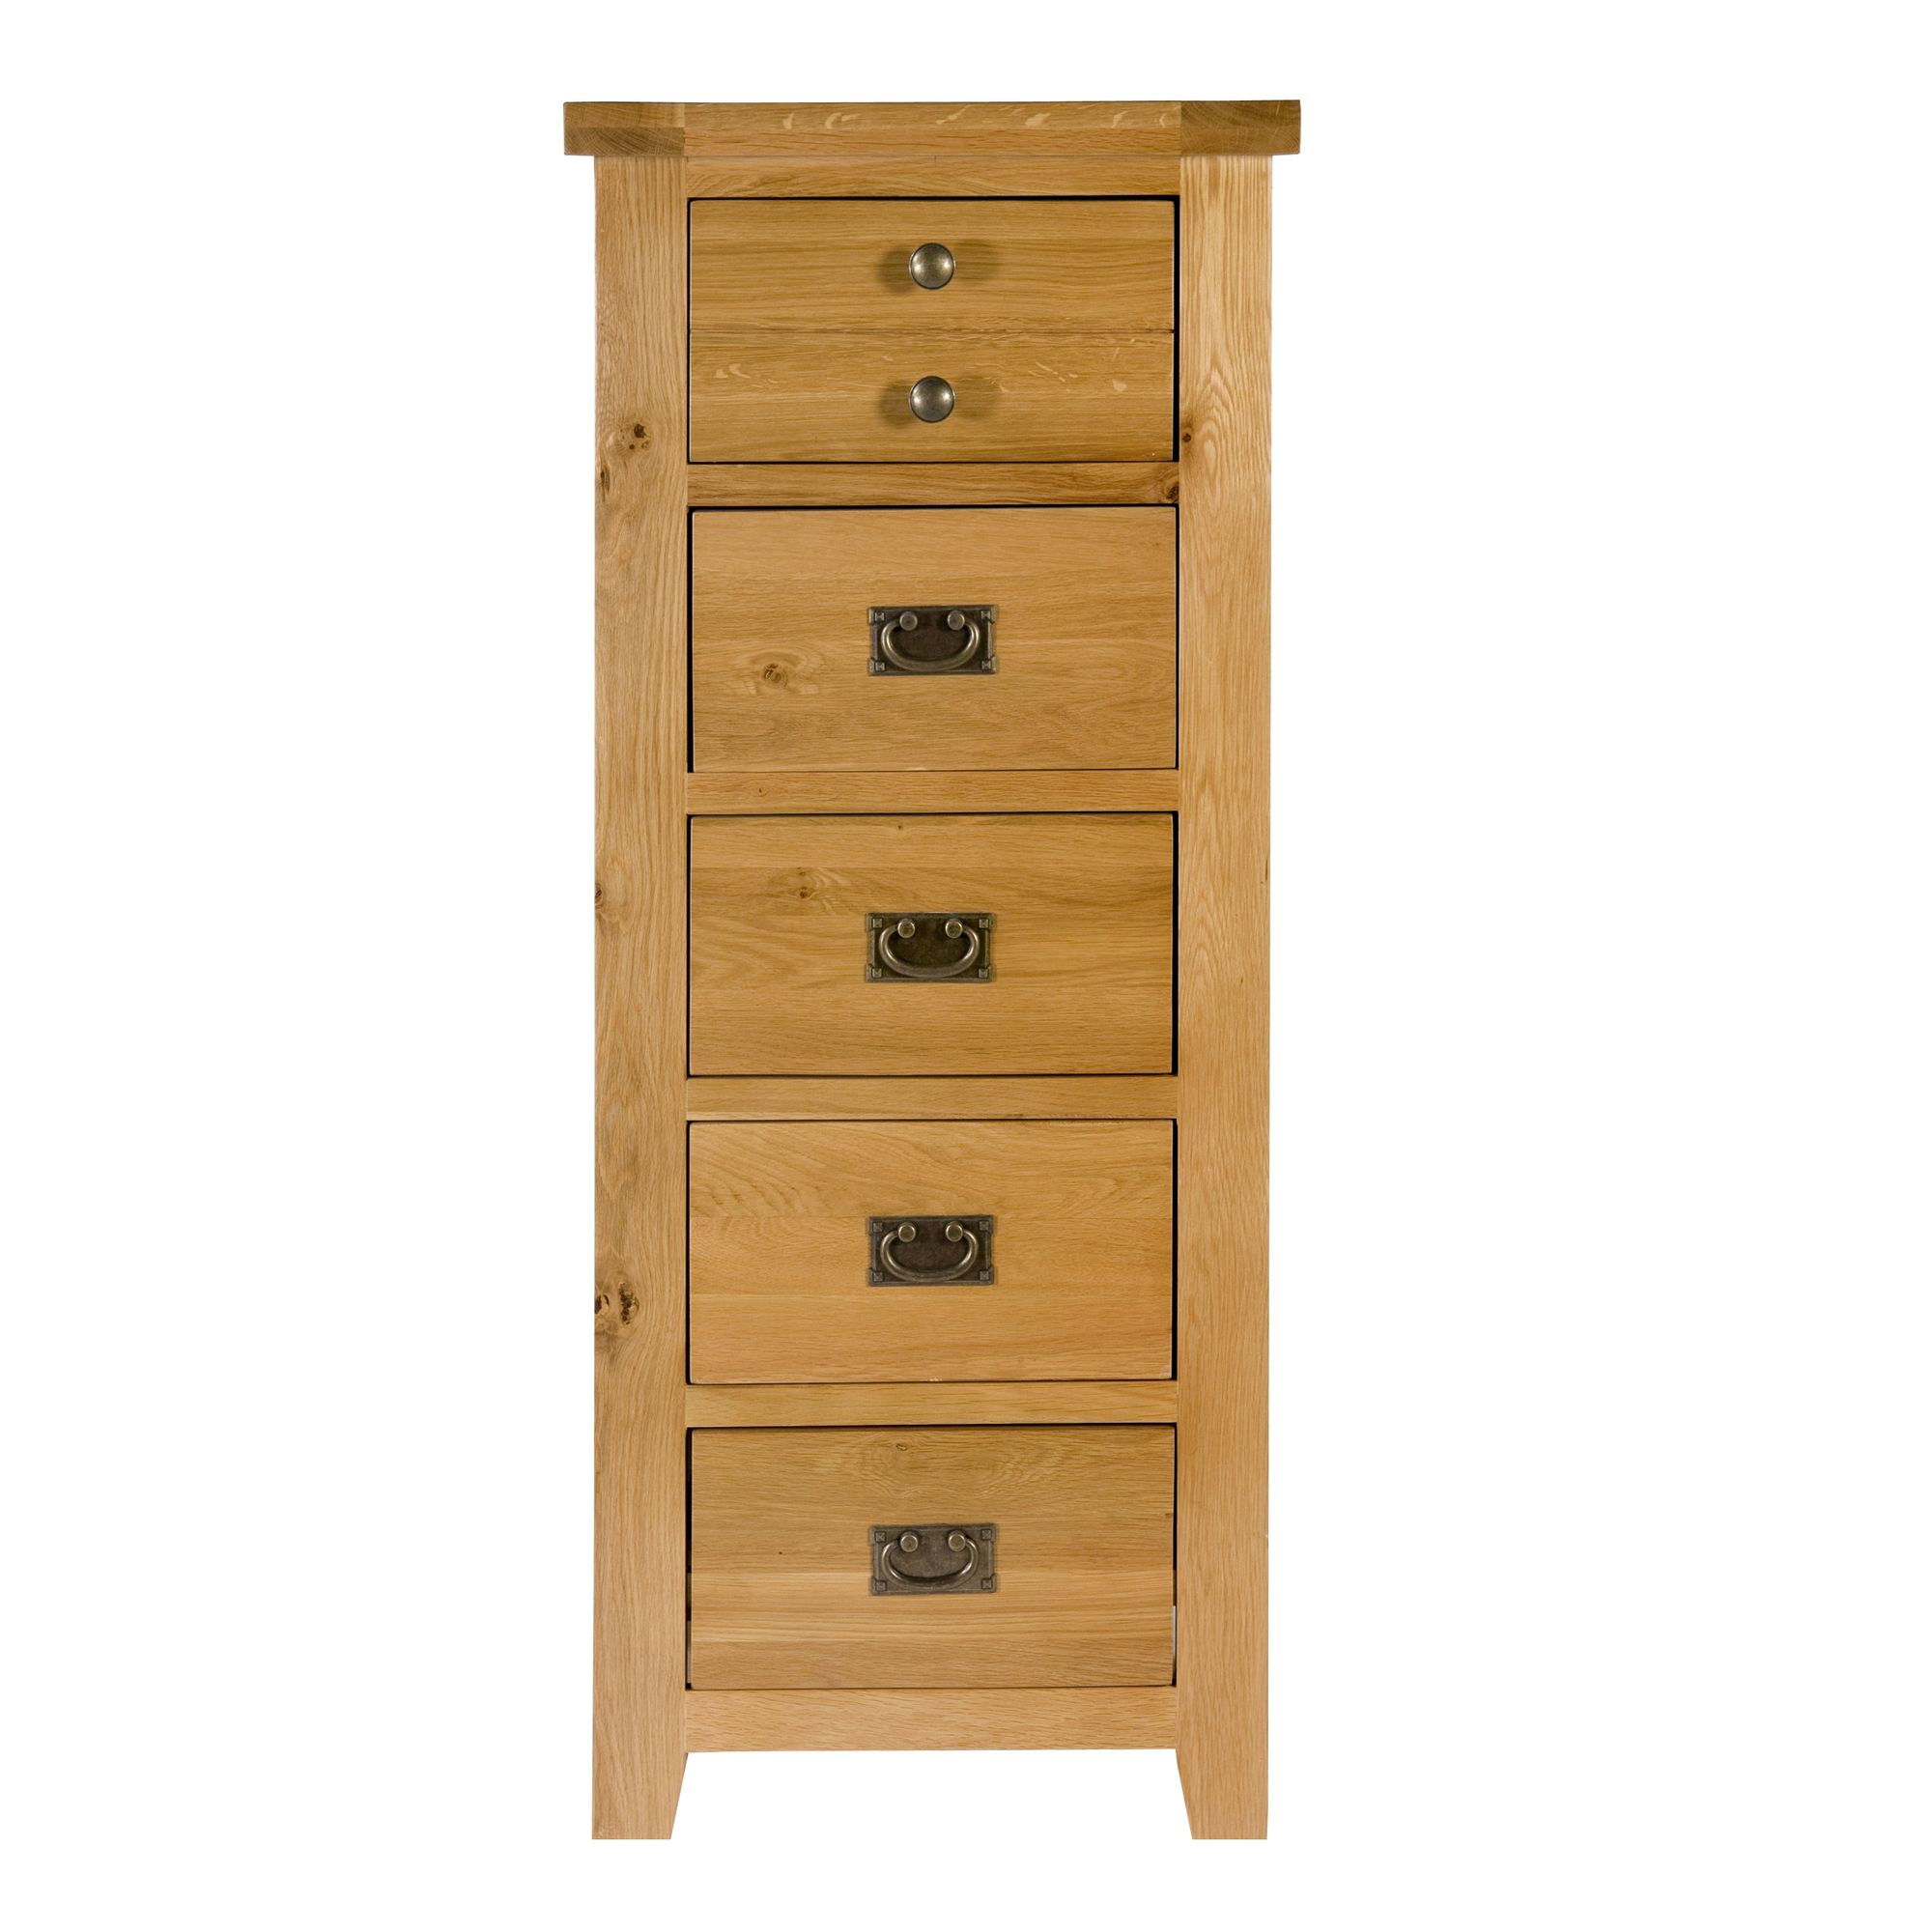 Elements Ludmilla Five Drawer Tall Chest in Warm Lacquer at Tesco Direct